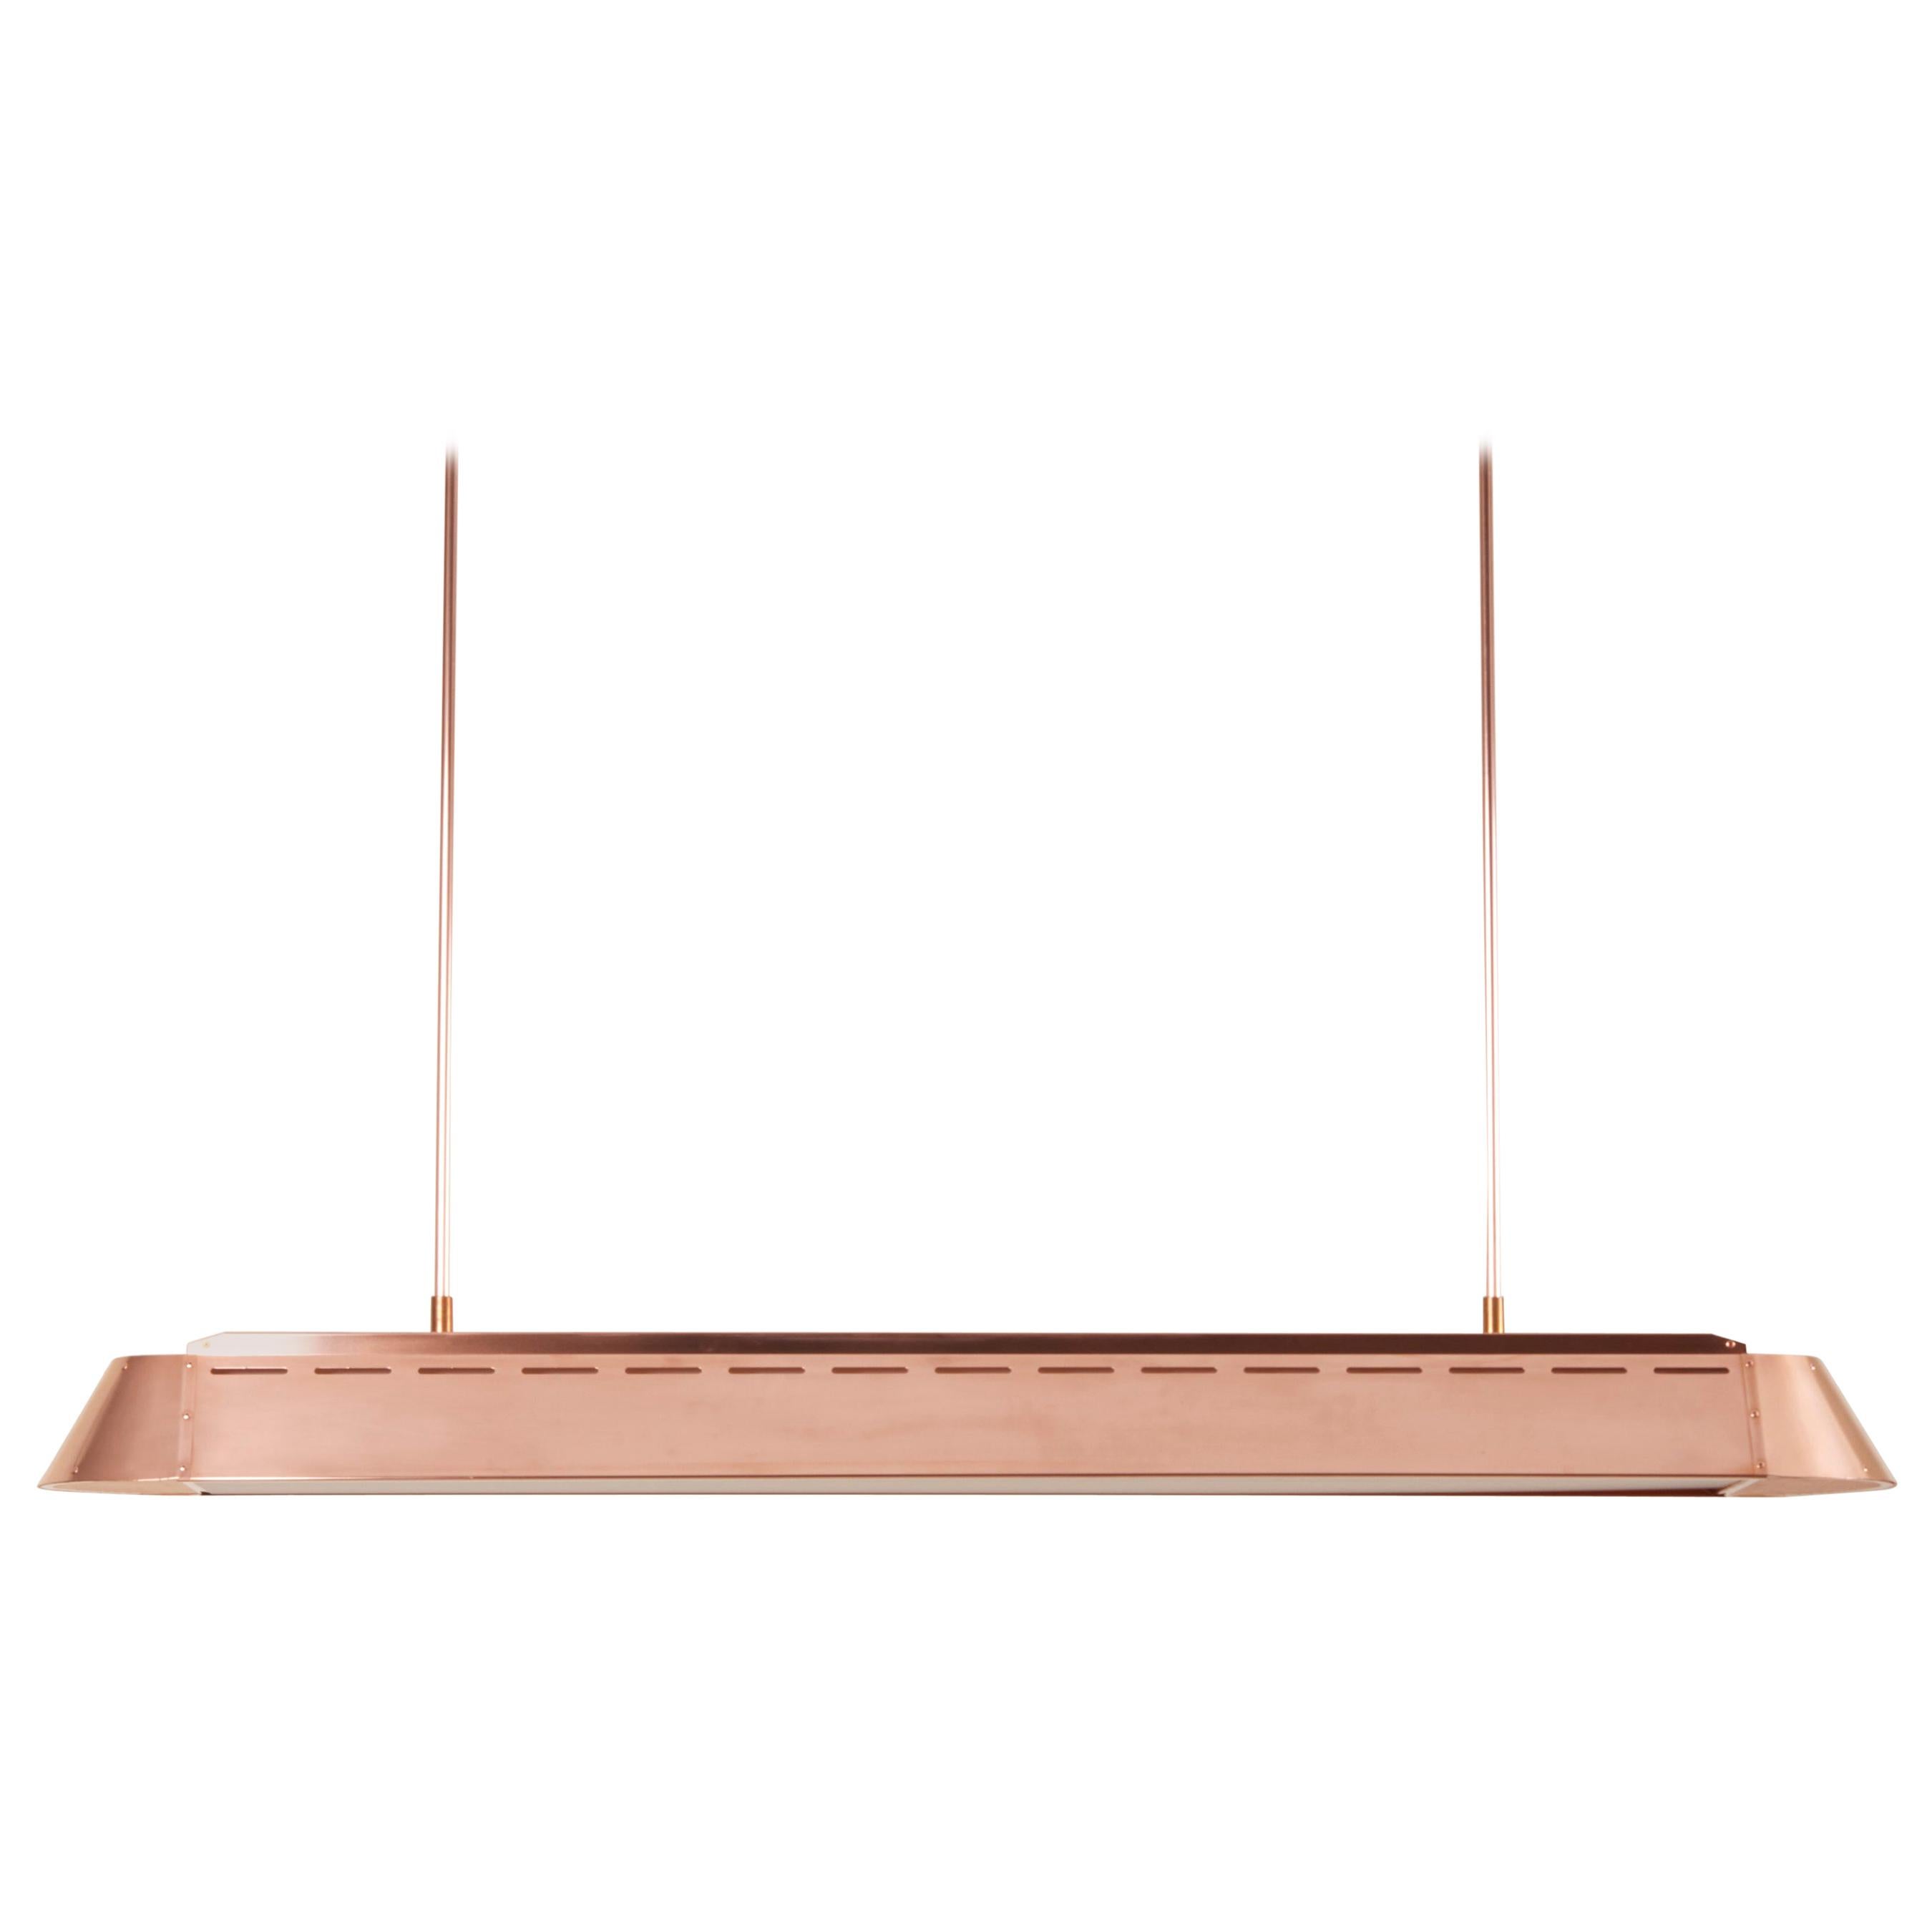 One of Two "TL-Copper" Suspension Light by Piet Hein Eek For Sale